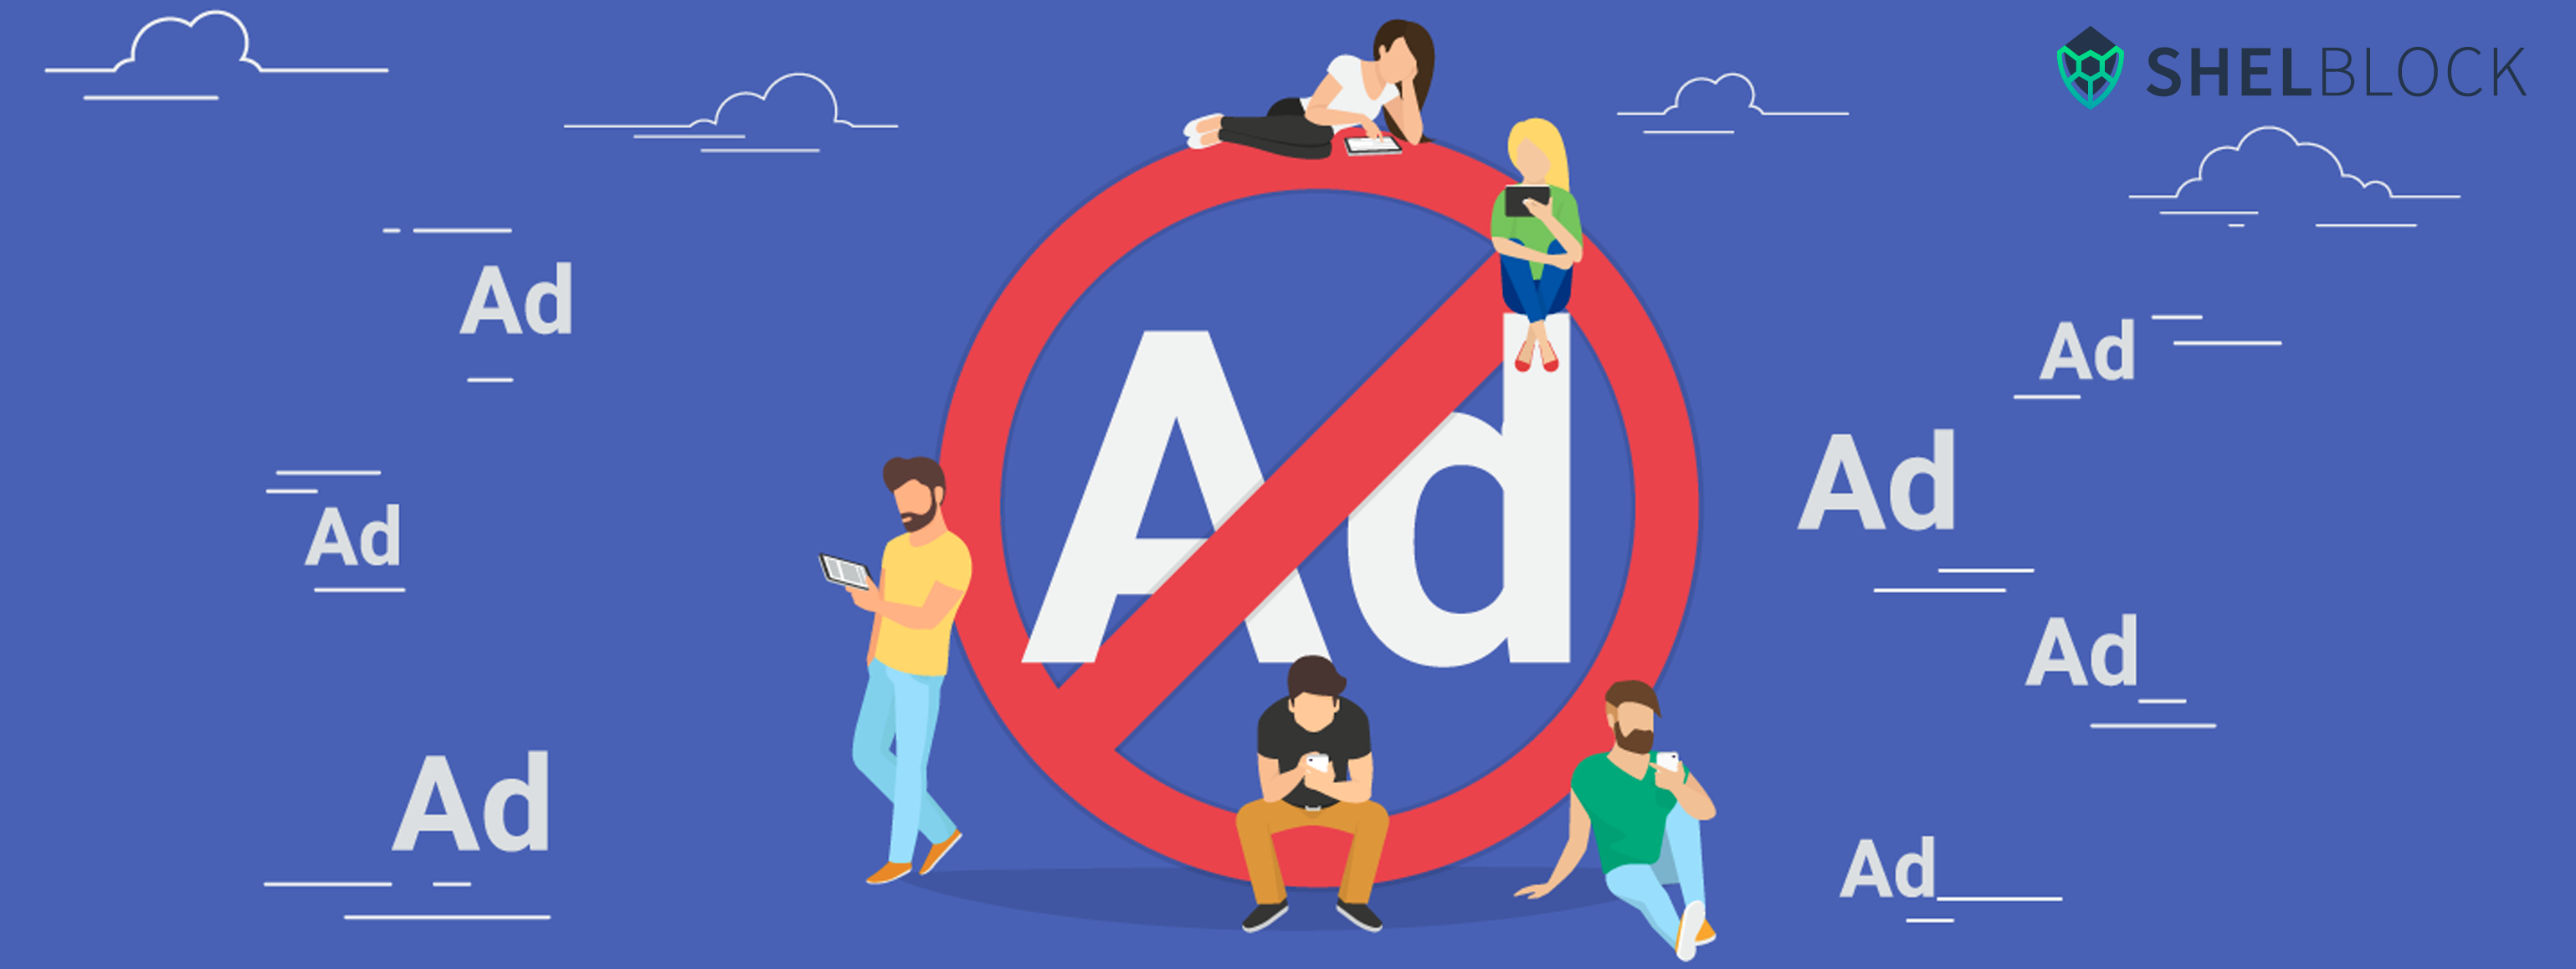 Why do Millenials use ad blockers so much?